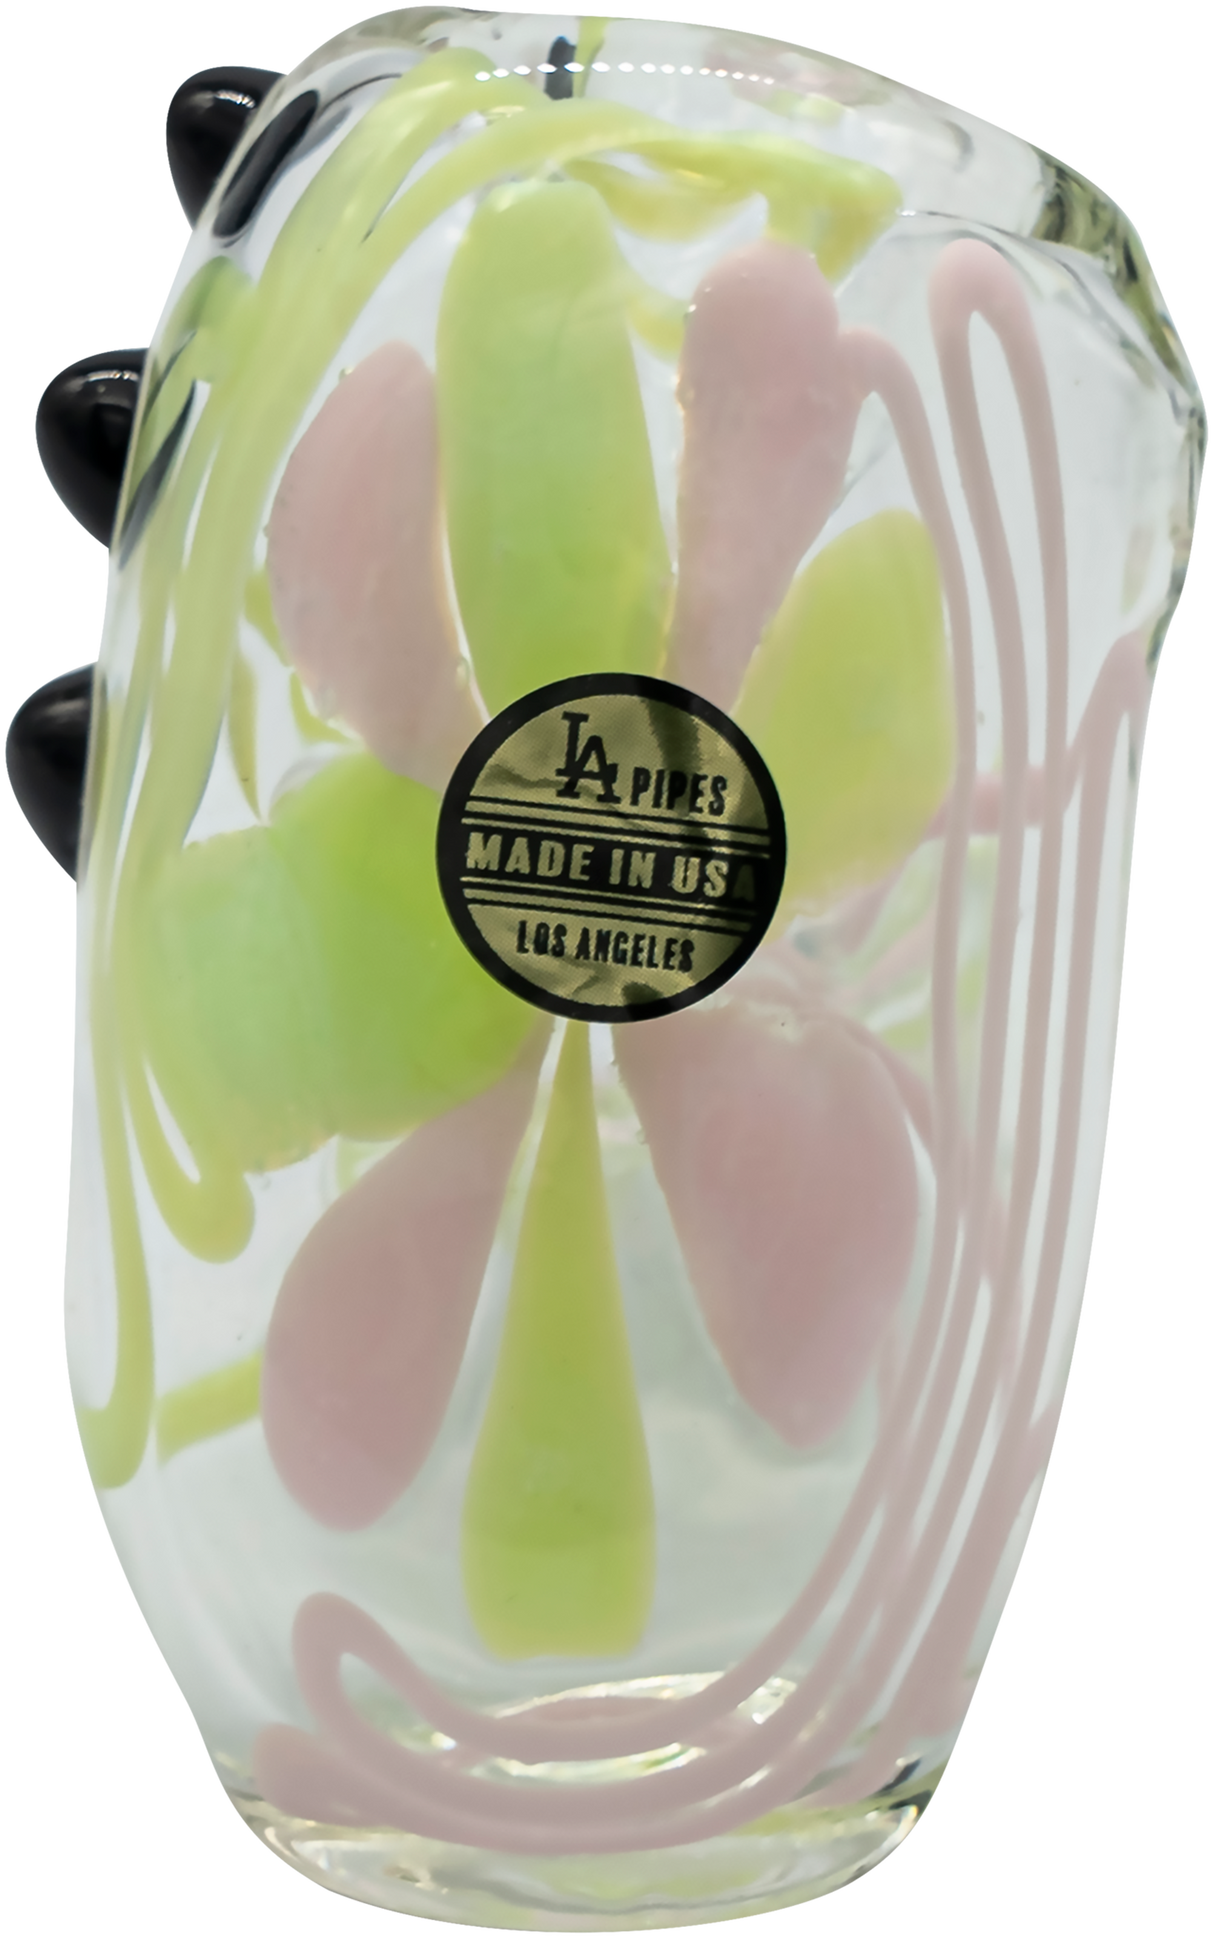 LA Pipes Green Slyme and Bubble Gum Twist Hammer Pipe, Sherlock Design, 4.5" Length